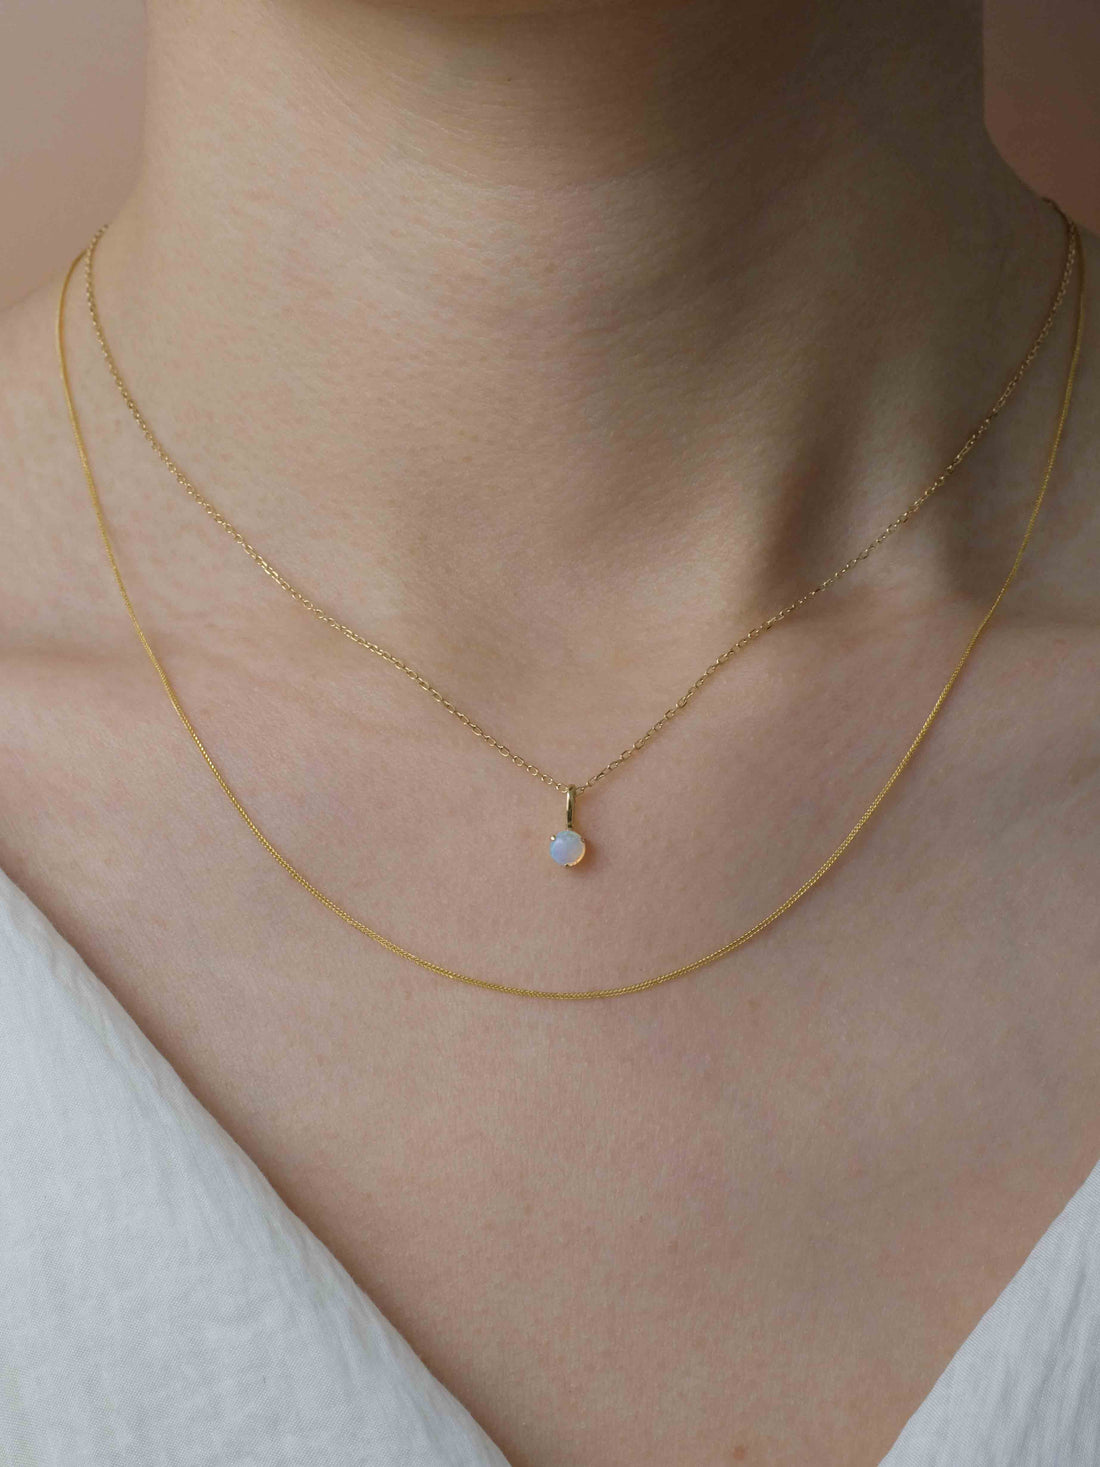 Round Opal Necklace / Pendant, 18k solid gold